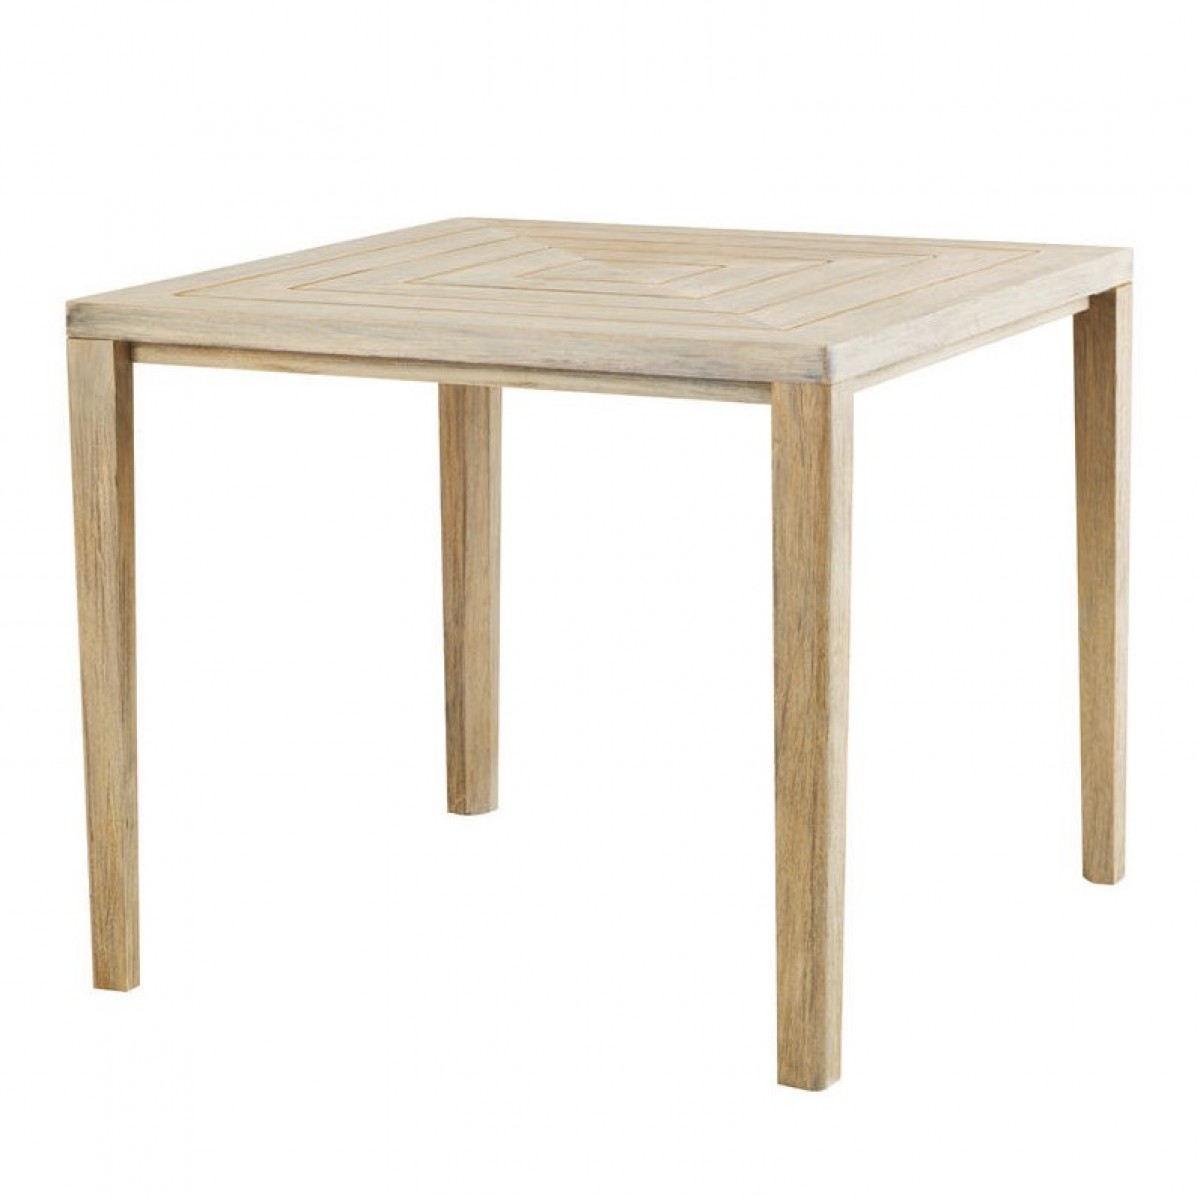 Friends Square Dining Table